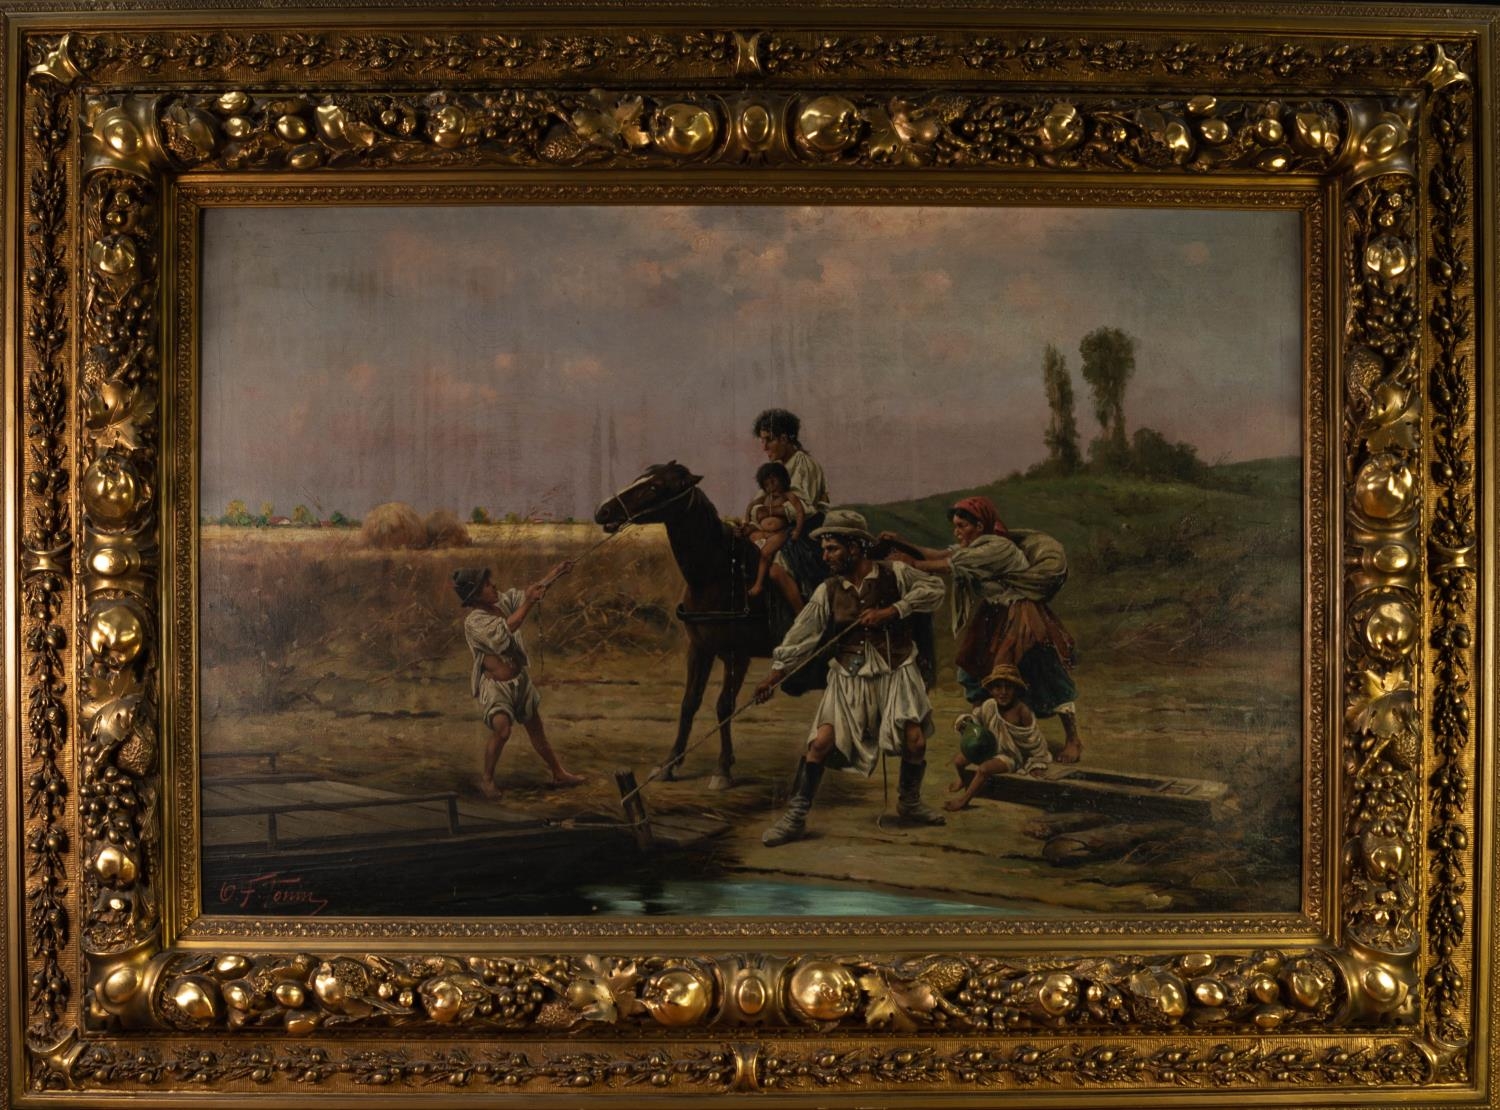 O.F. TONIN  OIL PAINTING ON CANVAS  European landscape with a family, two adults and three - Image 2 of 2